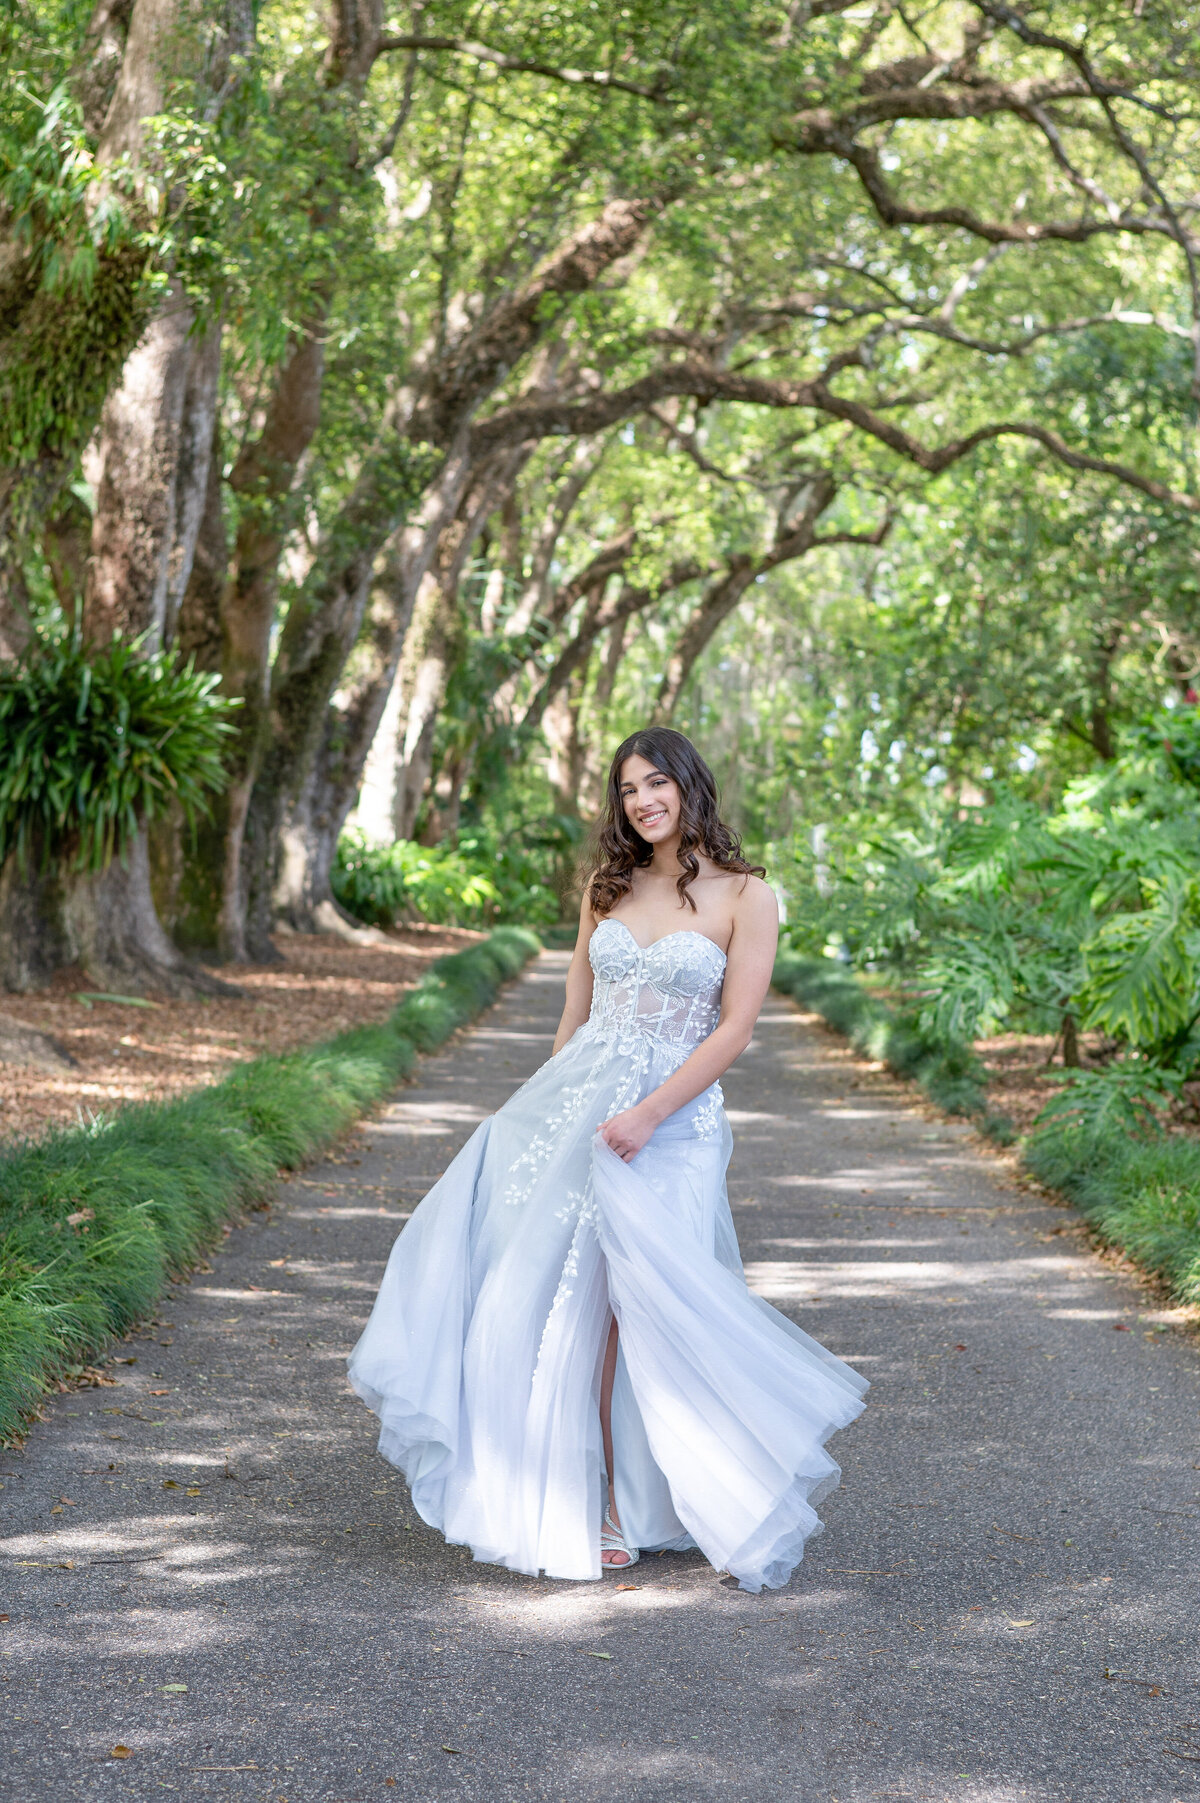 High school senior girl in floor length prom dress twirling in middle of path.